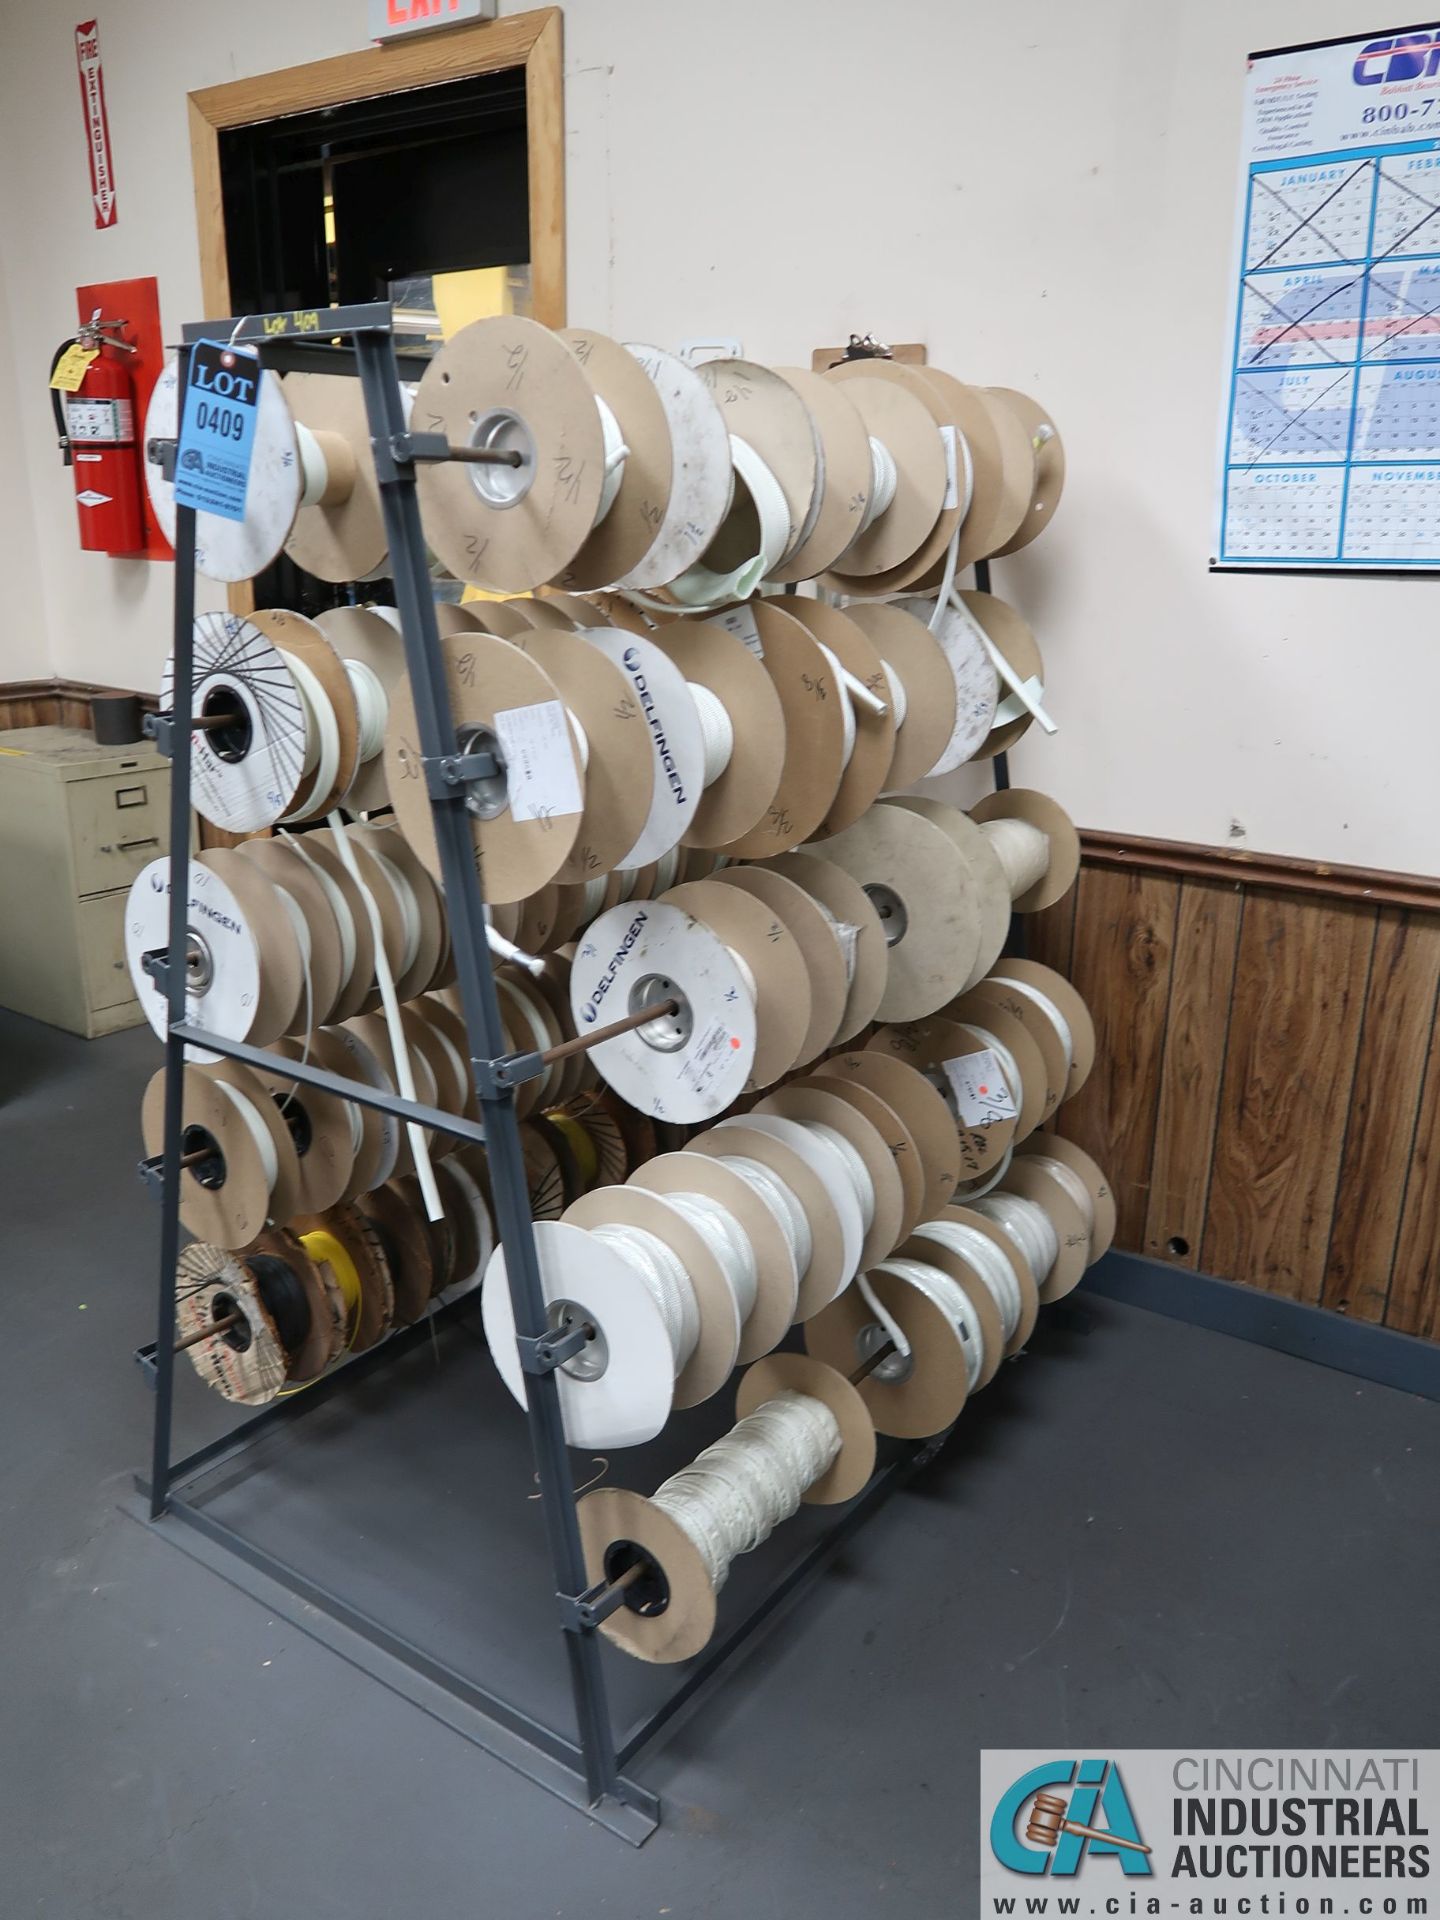 WIRE RACK WITH MISCELLANEOUS ROLLS OF WIRE INSULATION